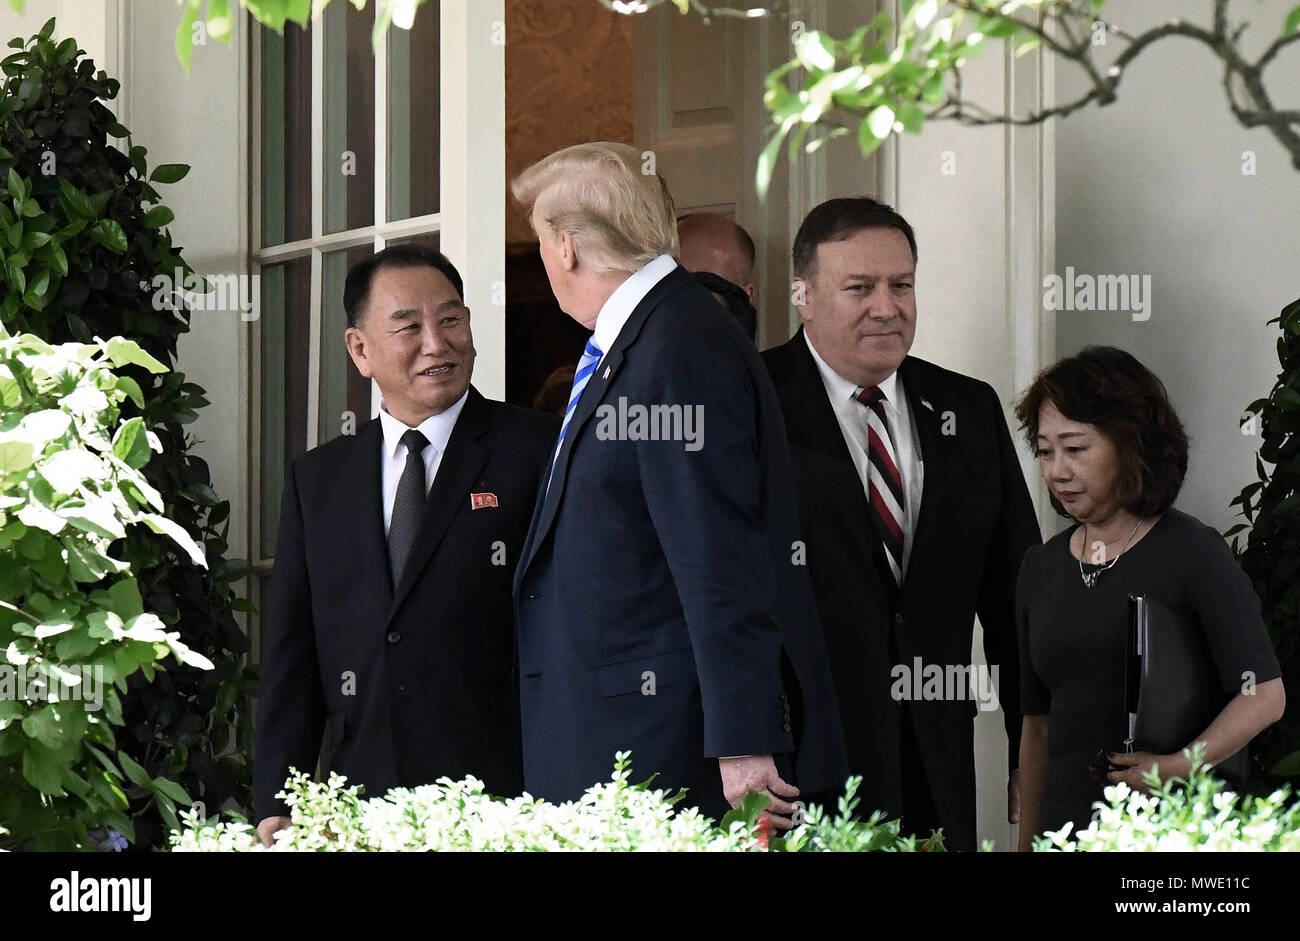 Washington, USA. 1st June 2018. US President Donald Trump walks out of the Oval Office with Kim Yong Chol, former North Korean military intelligence chief and one of leader Kim Jong Un's closest aides, in Washington on Friday, June 1, 2018. Credit: Olivier Douliery/Pool via CNP /MediaPunch Credit: MediaPunch Inc/Alamy Live News Stock Photo